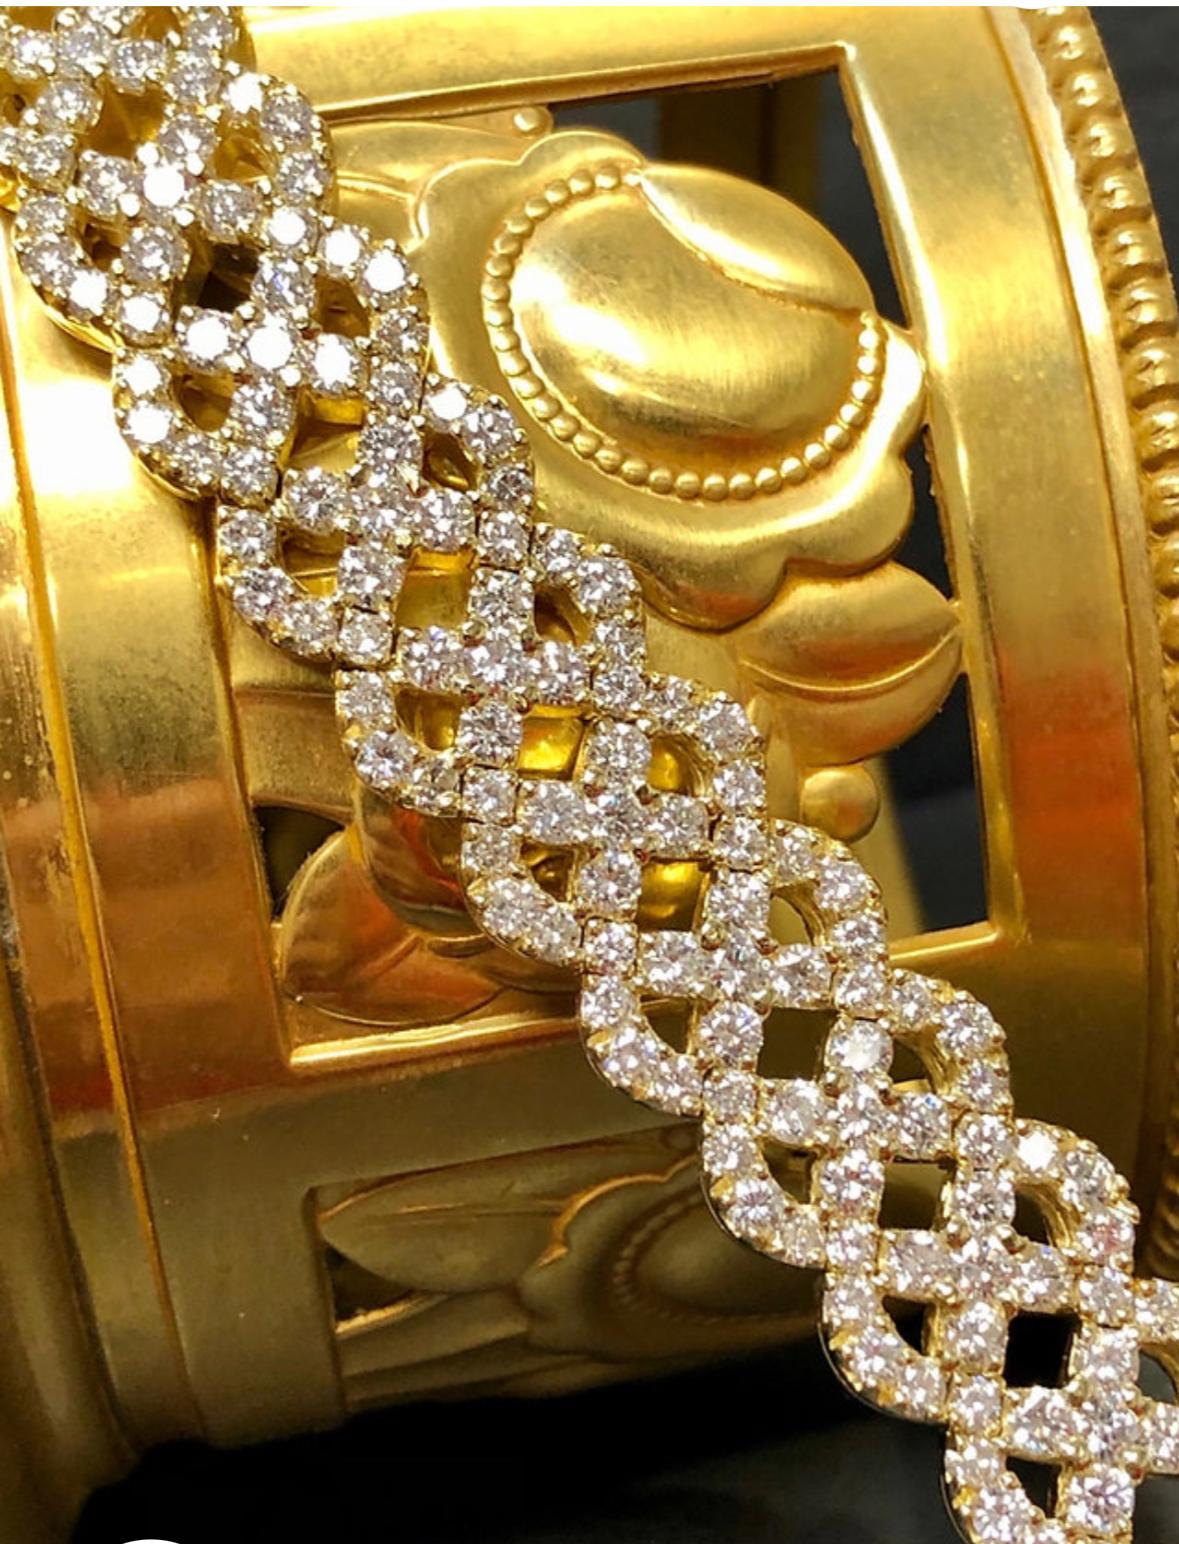 A fabulously made bracelet done in 18K yellow gold set with approximately 12.90cttw in F-G color Vs1-2 clarity diamonds. Very substantial piece.

Dimensions/Weight
6.80” long by .50” wide. Weighs 28dwt.

Condition
All stones are secure and